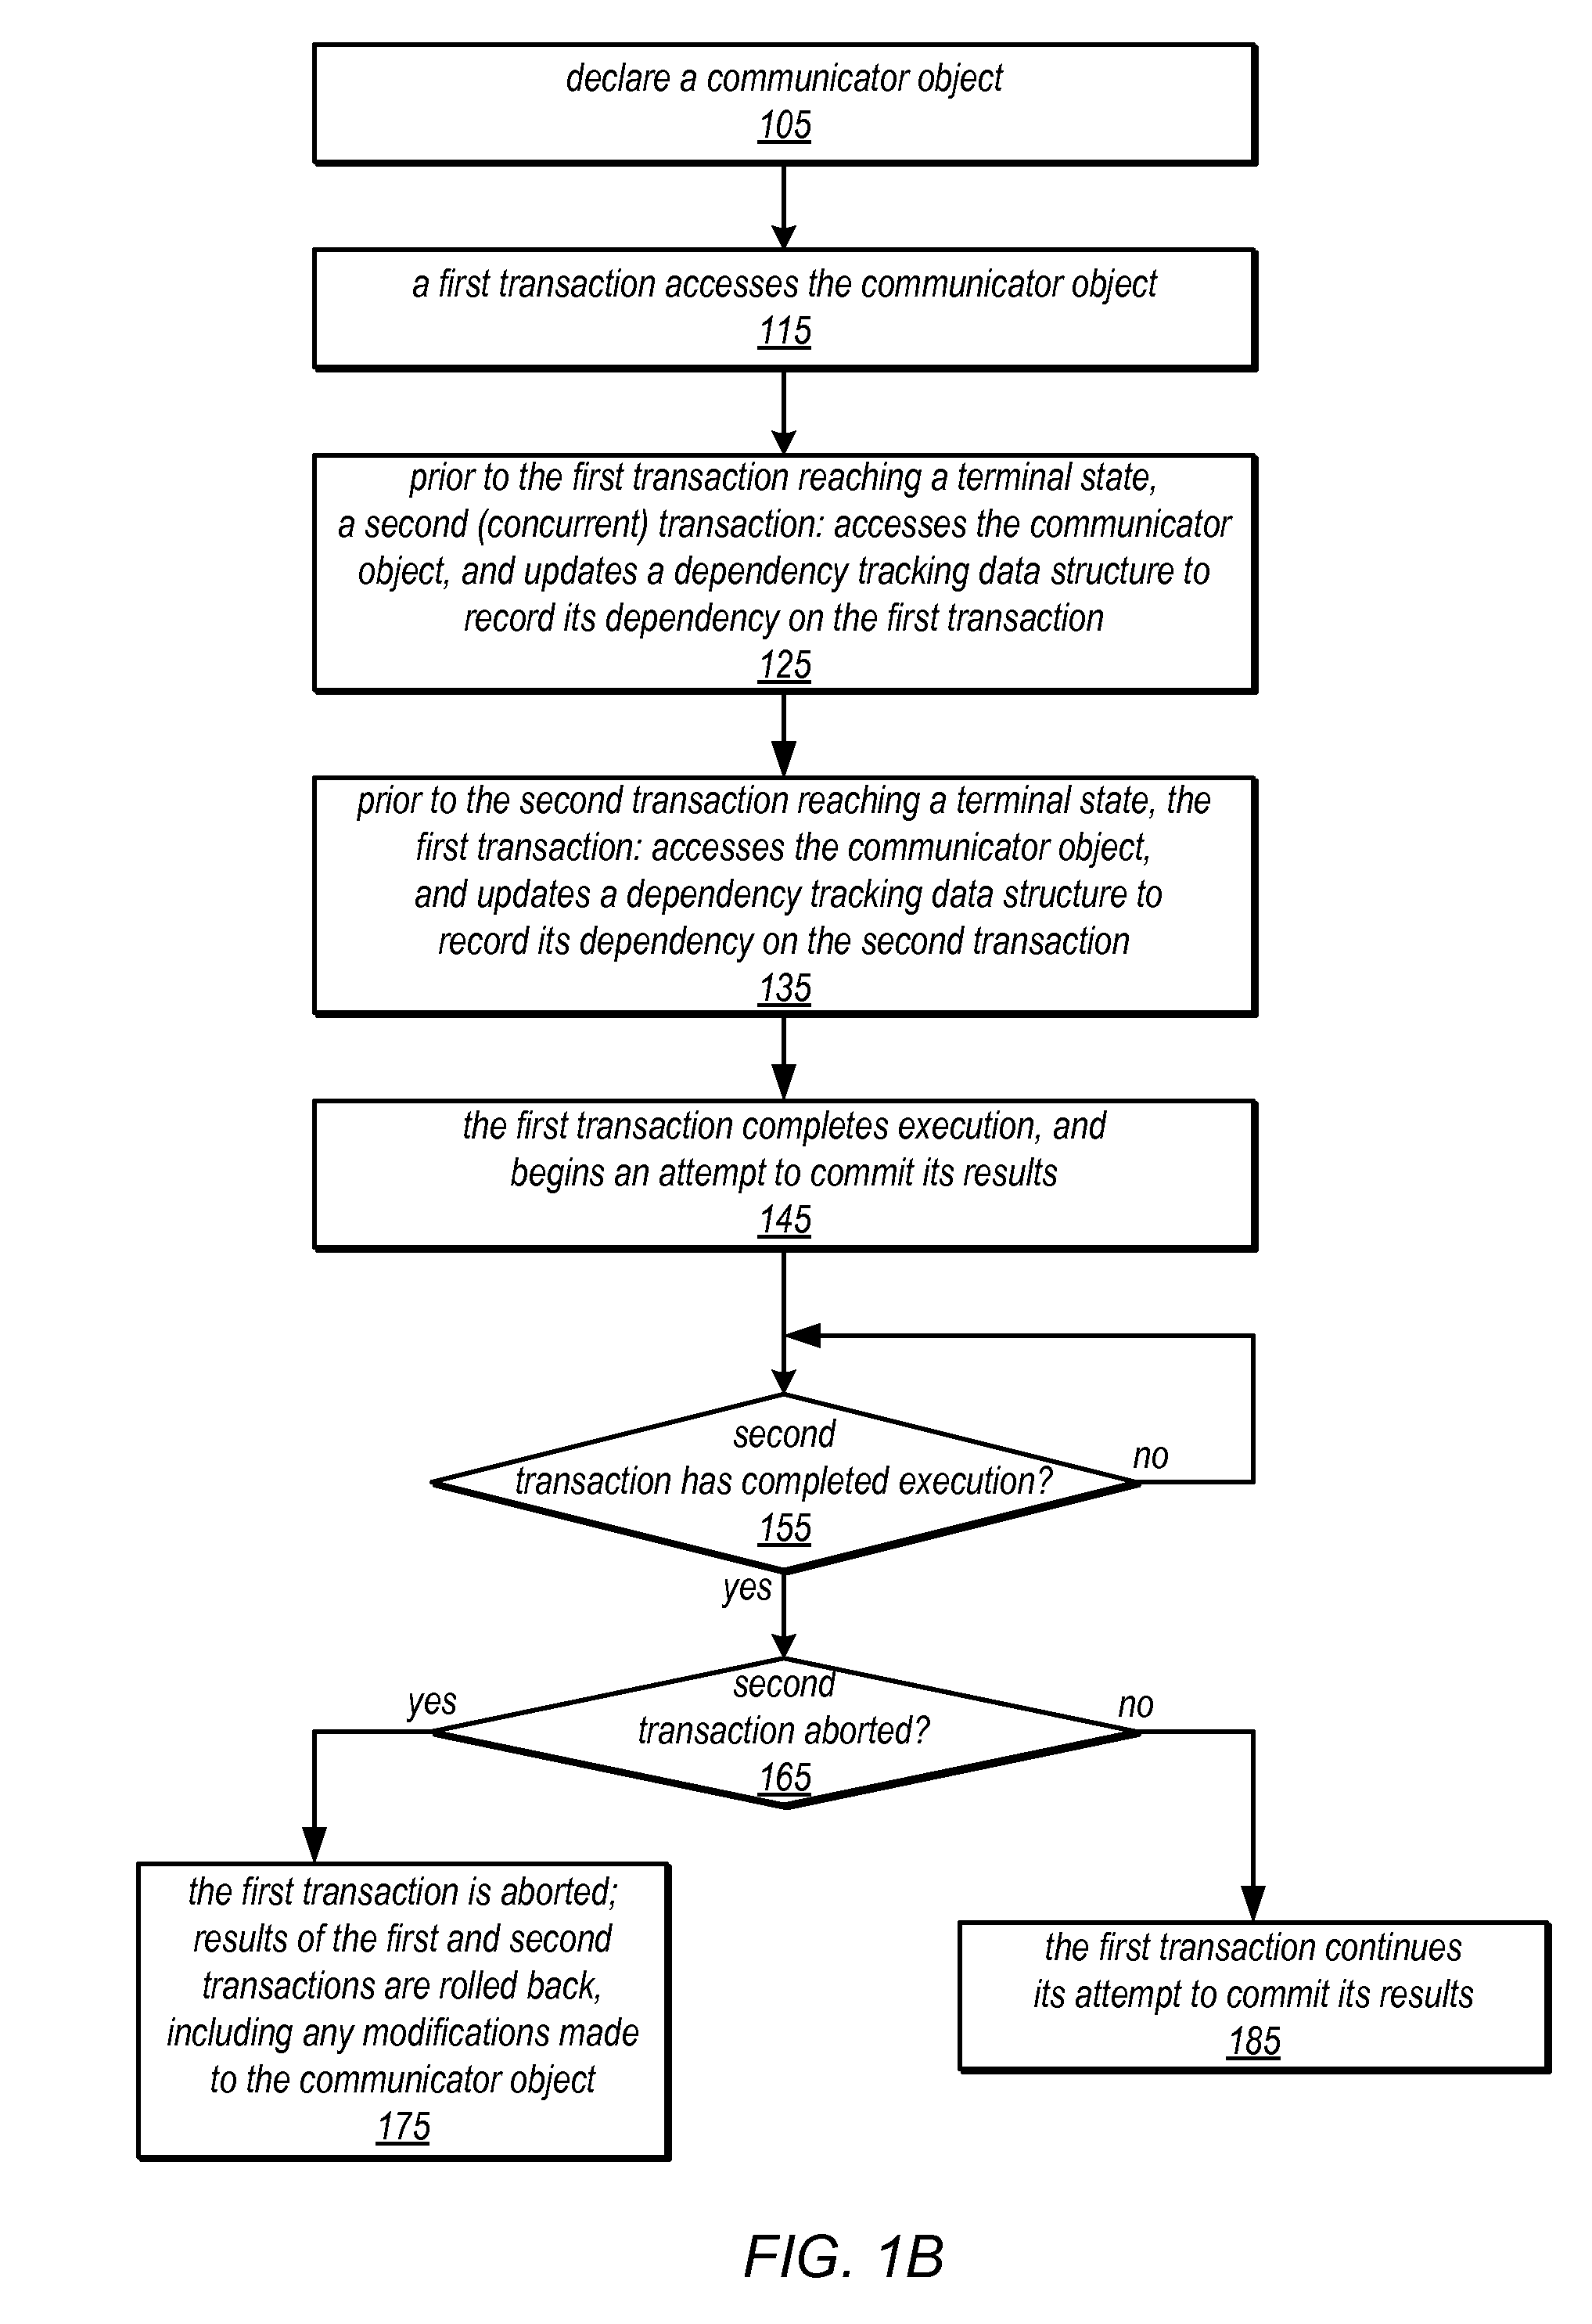 System and Method for Communication Between Concurrent Transactions Using Transaction Communicator Objects